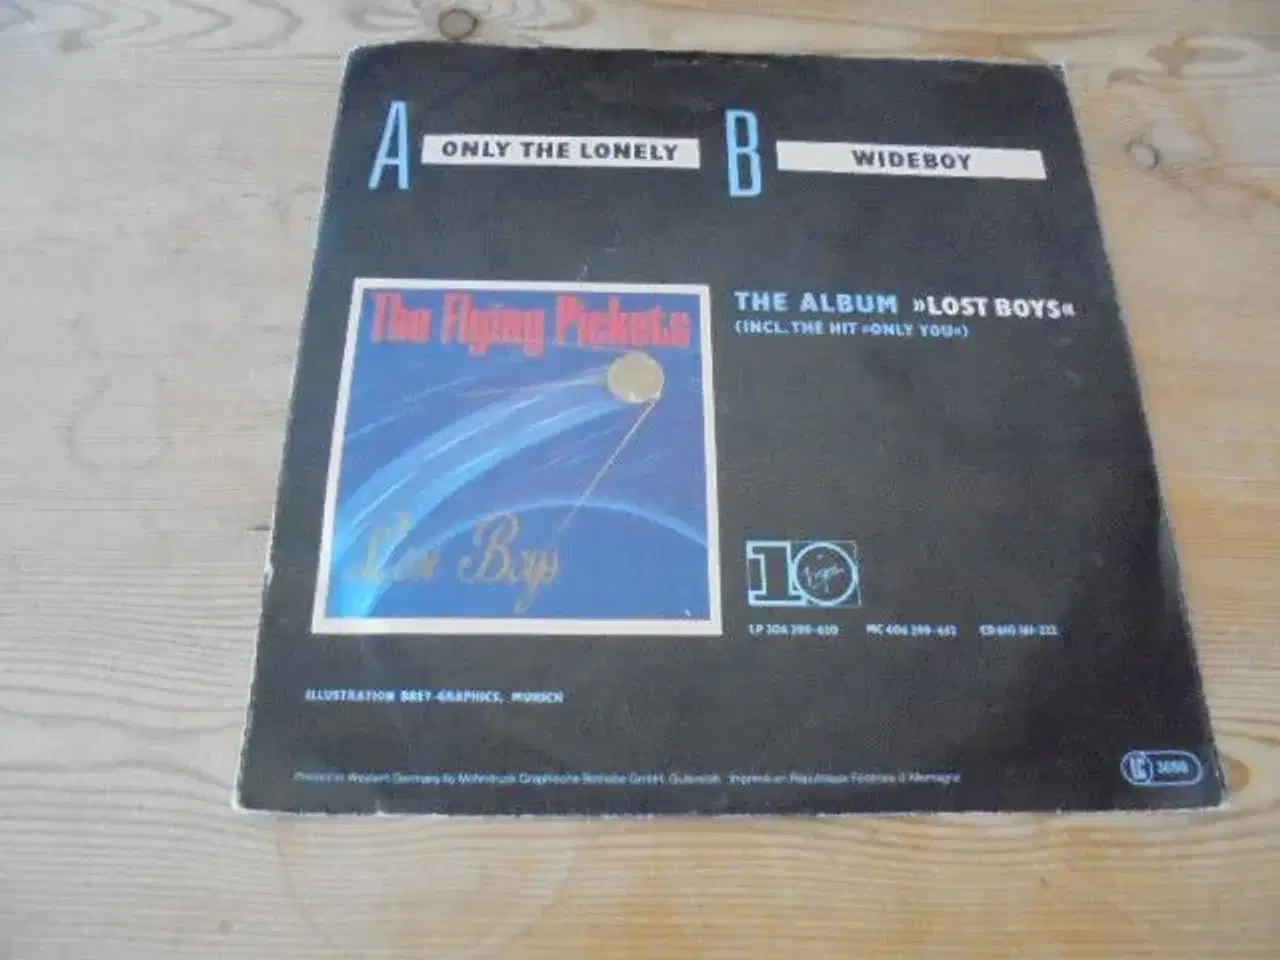 Billede 2 - Single - The Flying Pickets - Only the Lonely  